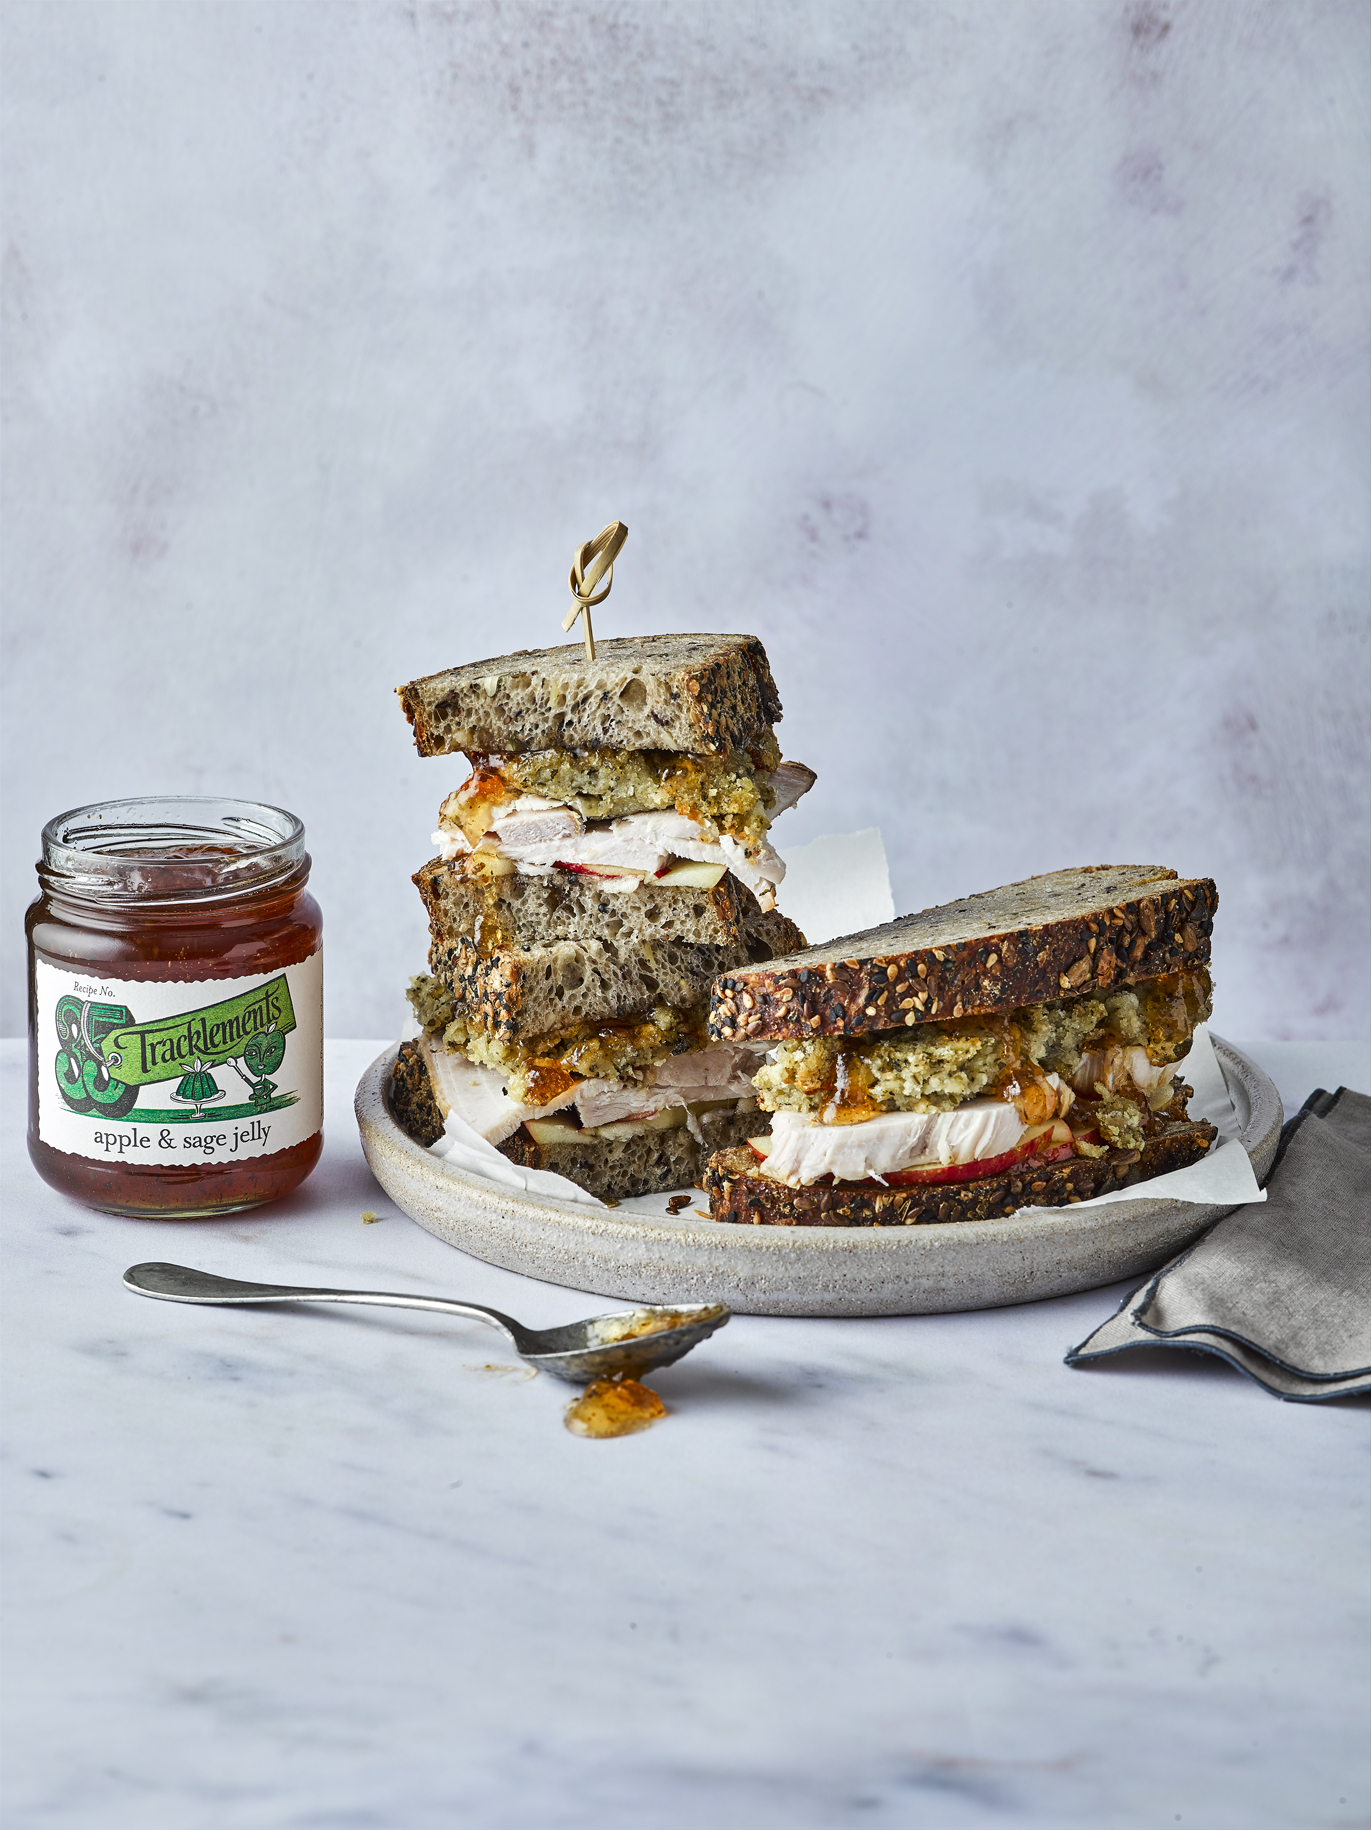 Pork, Stuffing and Apple & Sage Jelly Sandwich